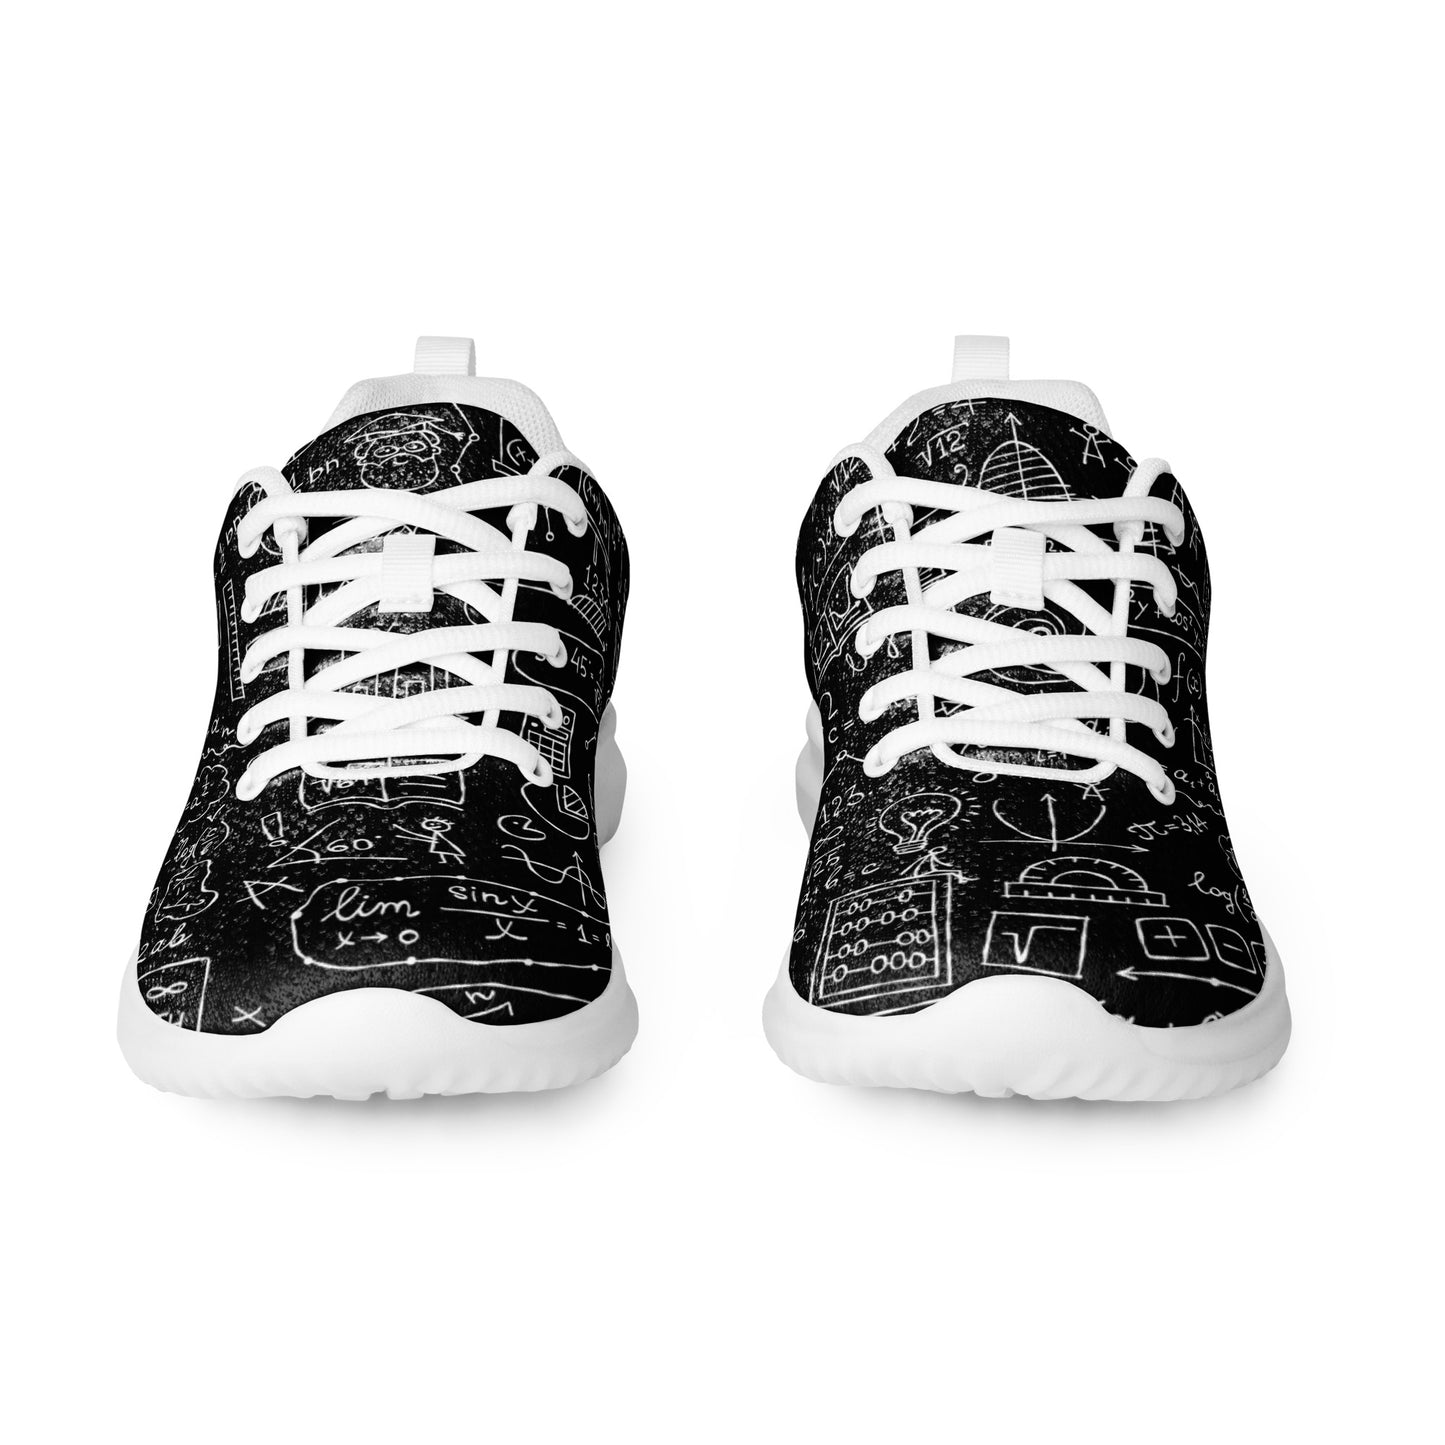 Women's Athletic Shoes with Math Print Formulas and Graphs kudrylab